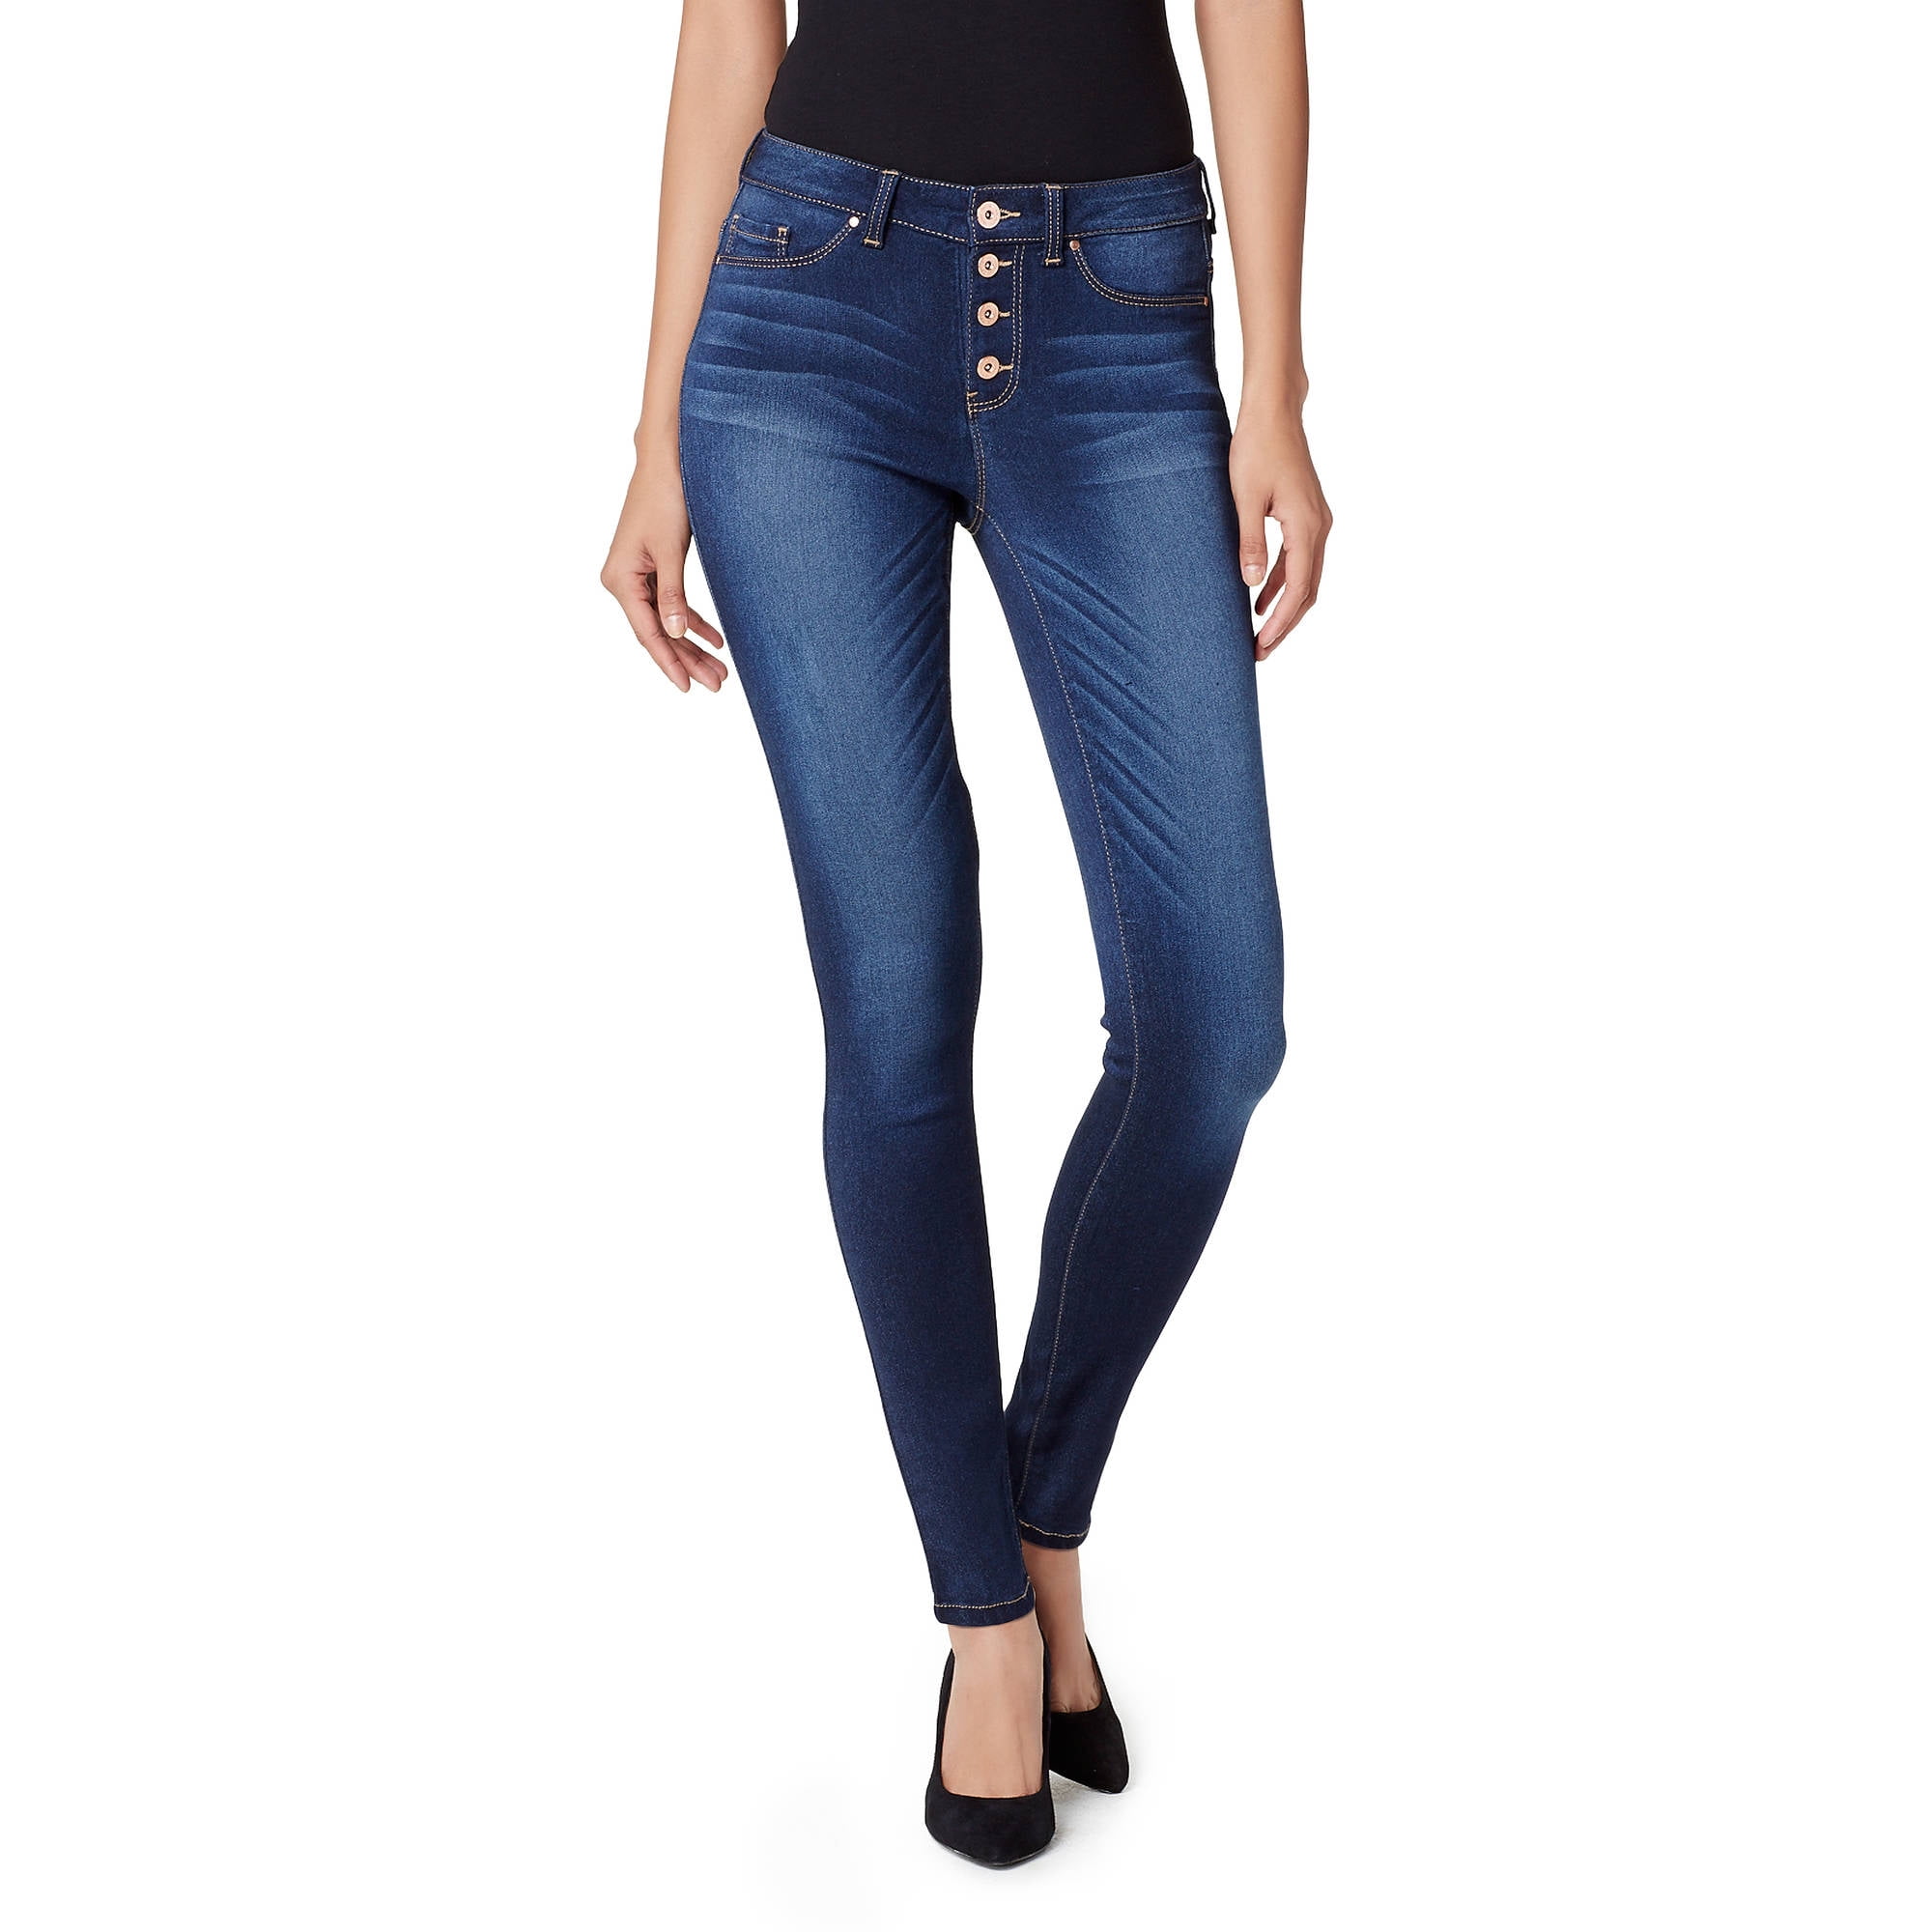 3 button high waisted skinny jeans